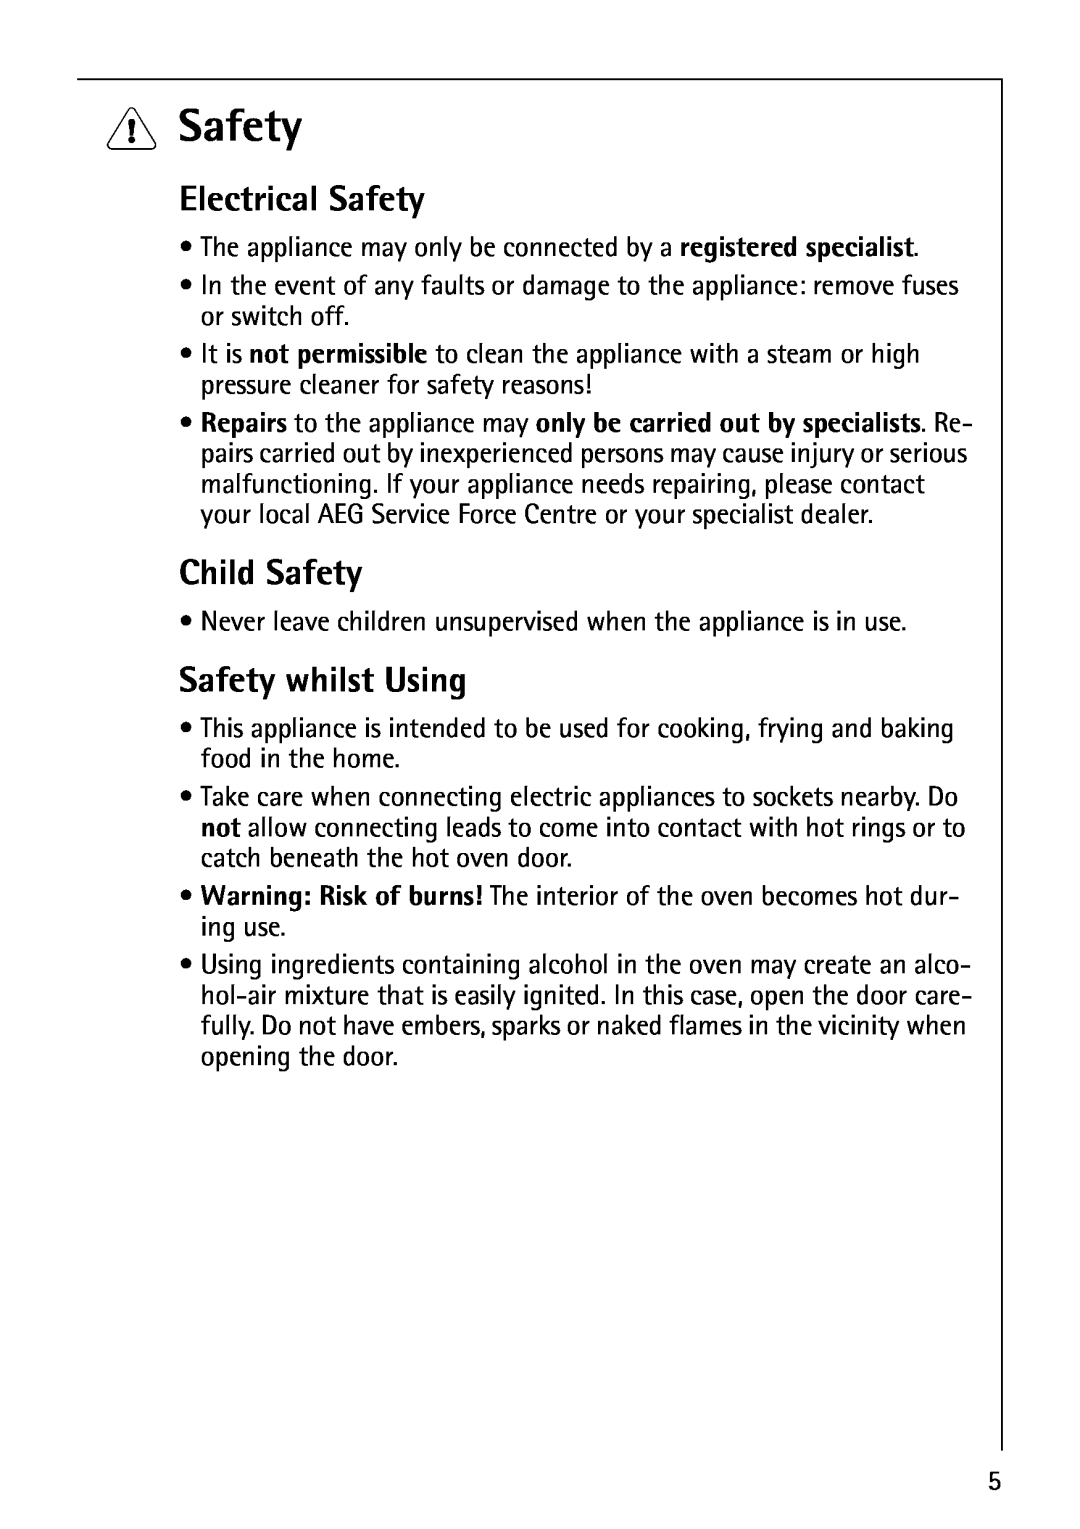 Electrolux B1100-2 manual Electrical Safety, Child Safety, Safety whilst Using 